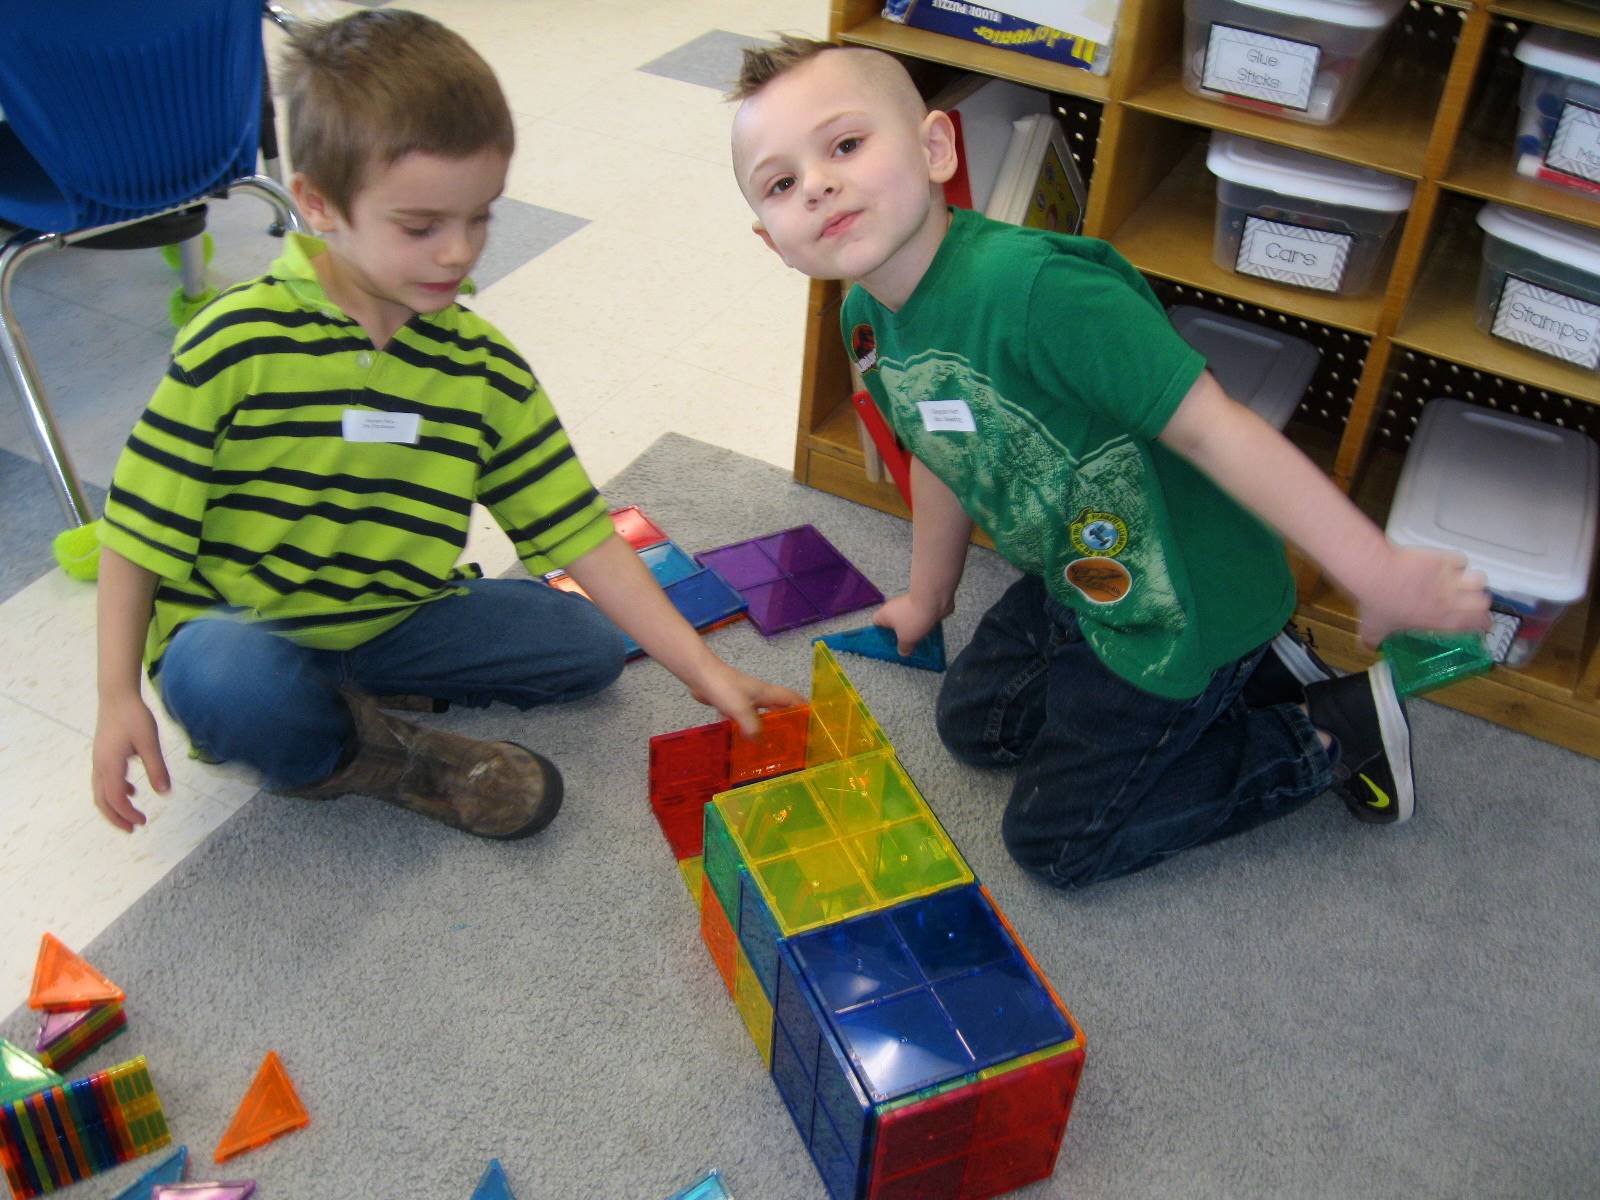 2 create a rainbow castle out of 100 magnetic blocks.